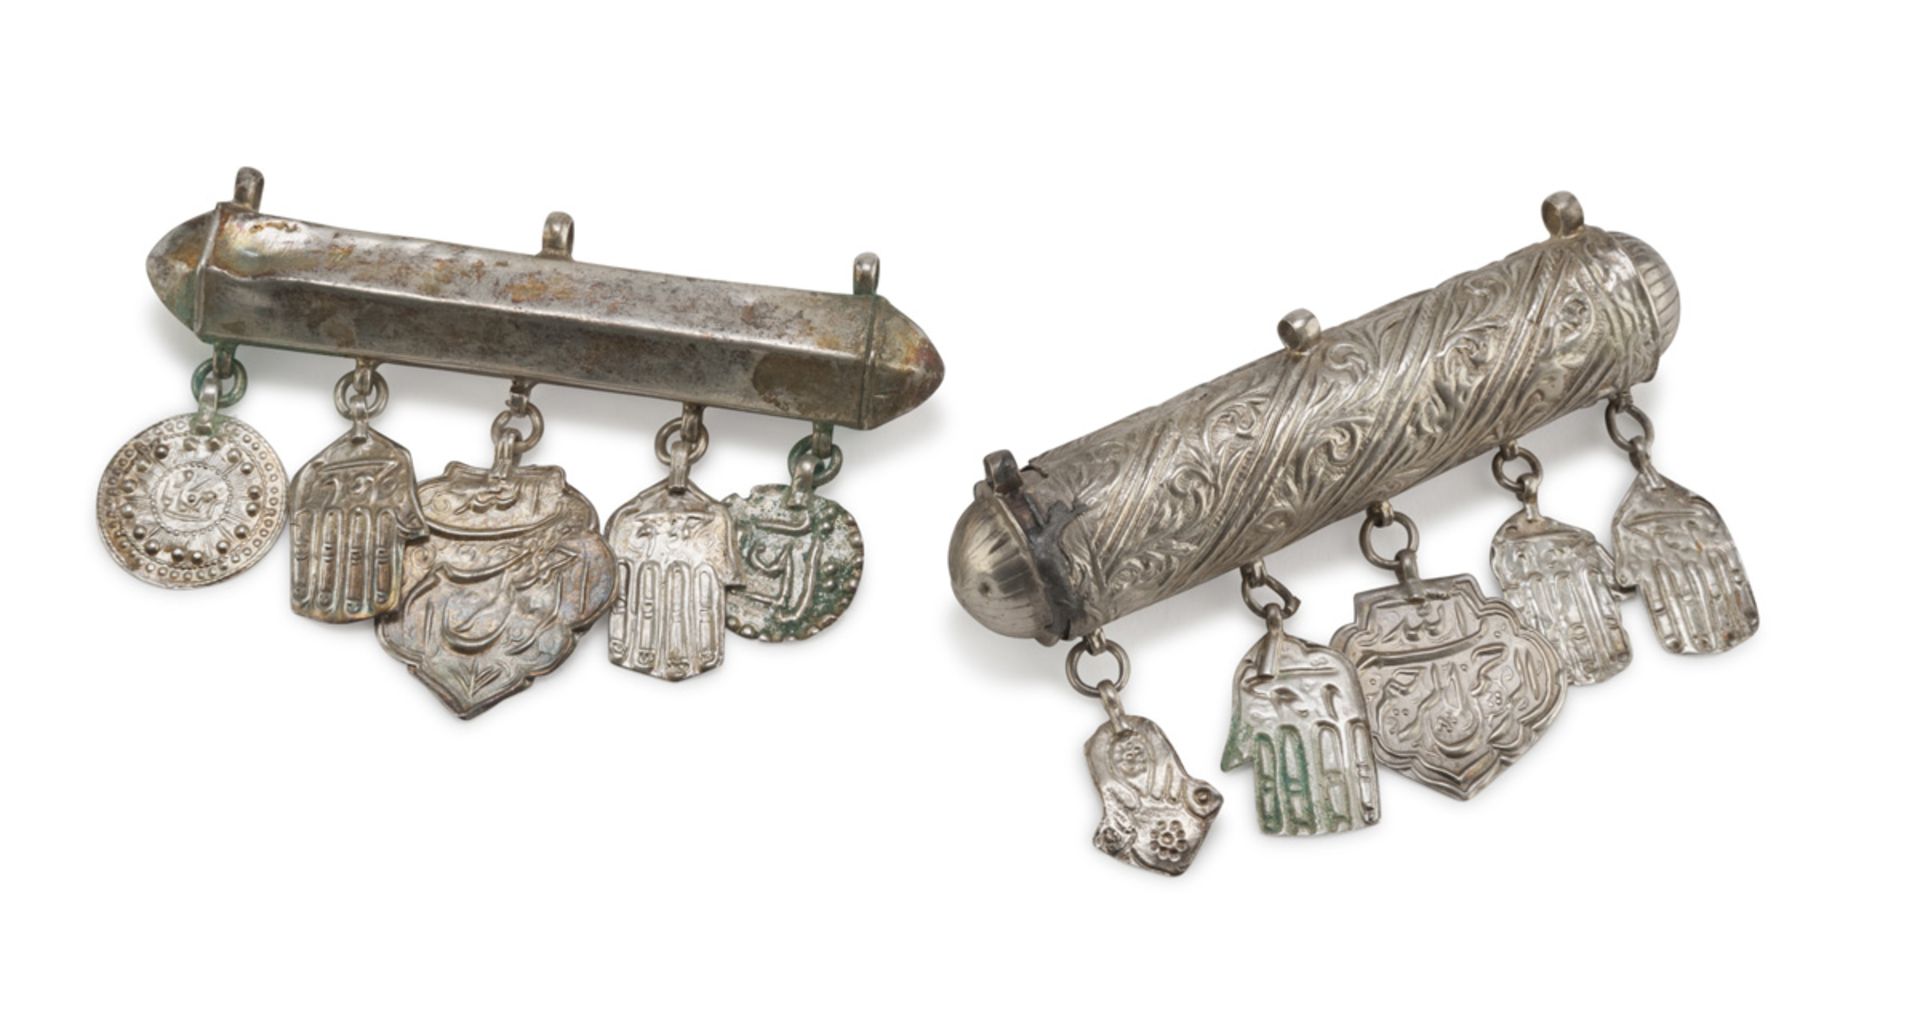 TWO INFANT NECKLACES IN SILVER, PROBABLY PERSIA 20TH CENTURY with pendants of various shapes. Length